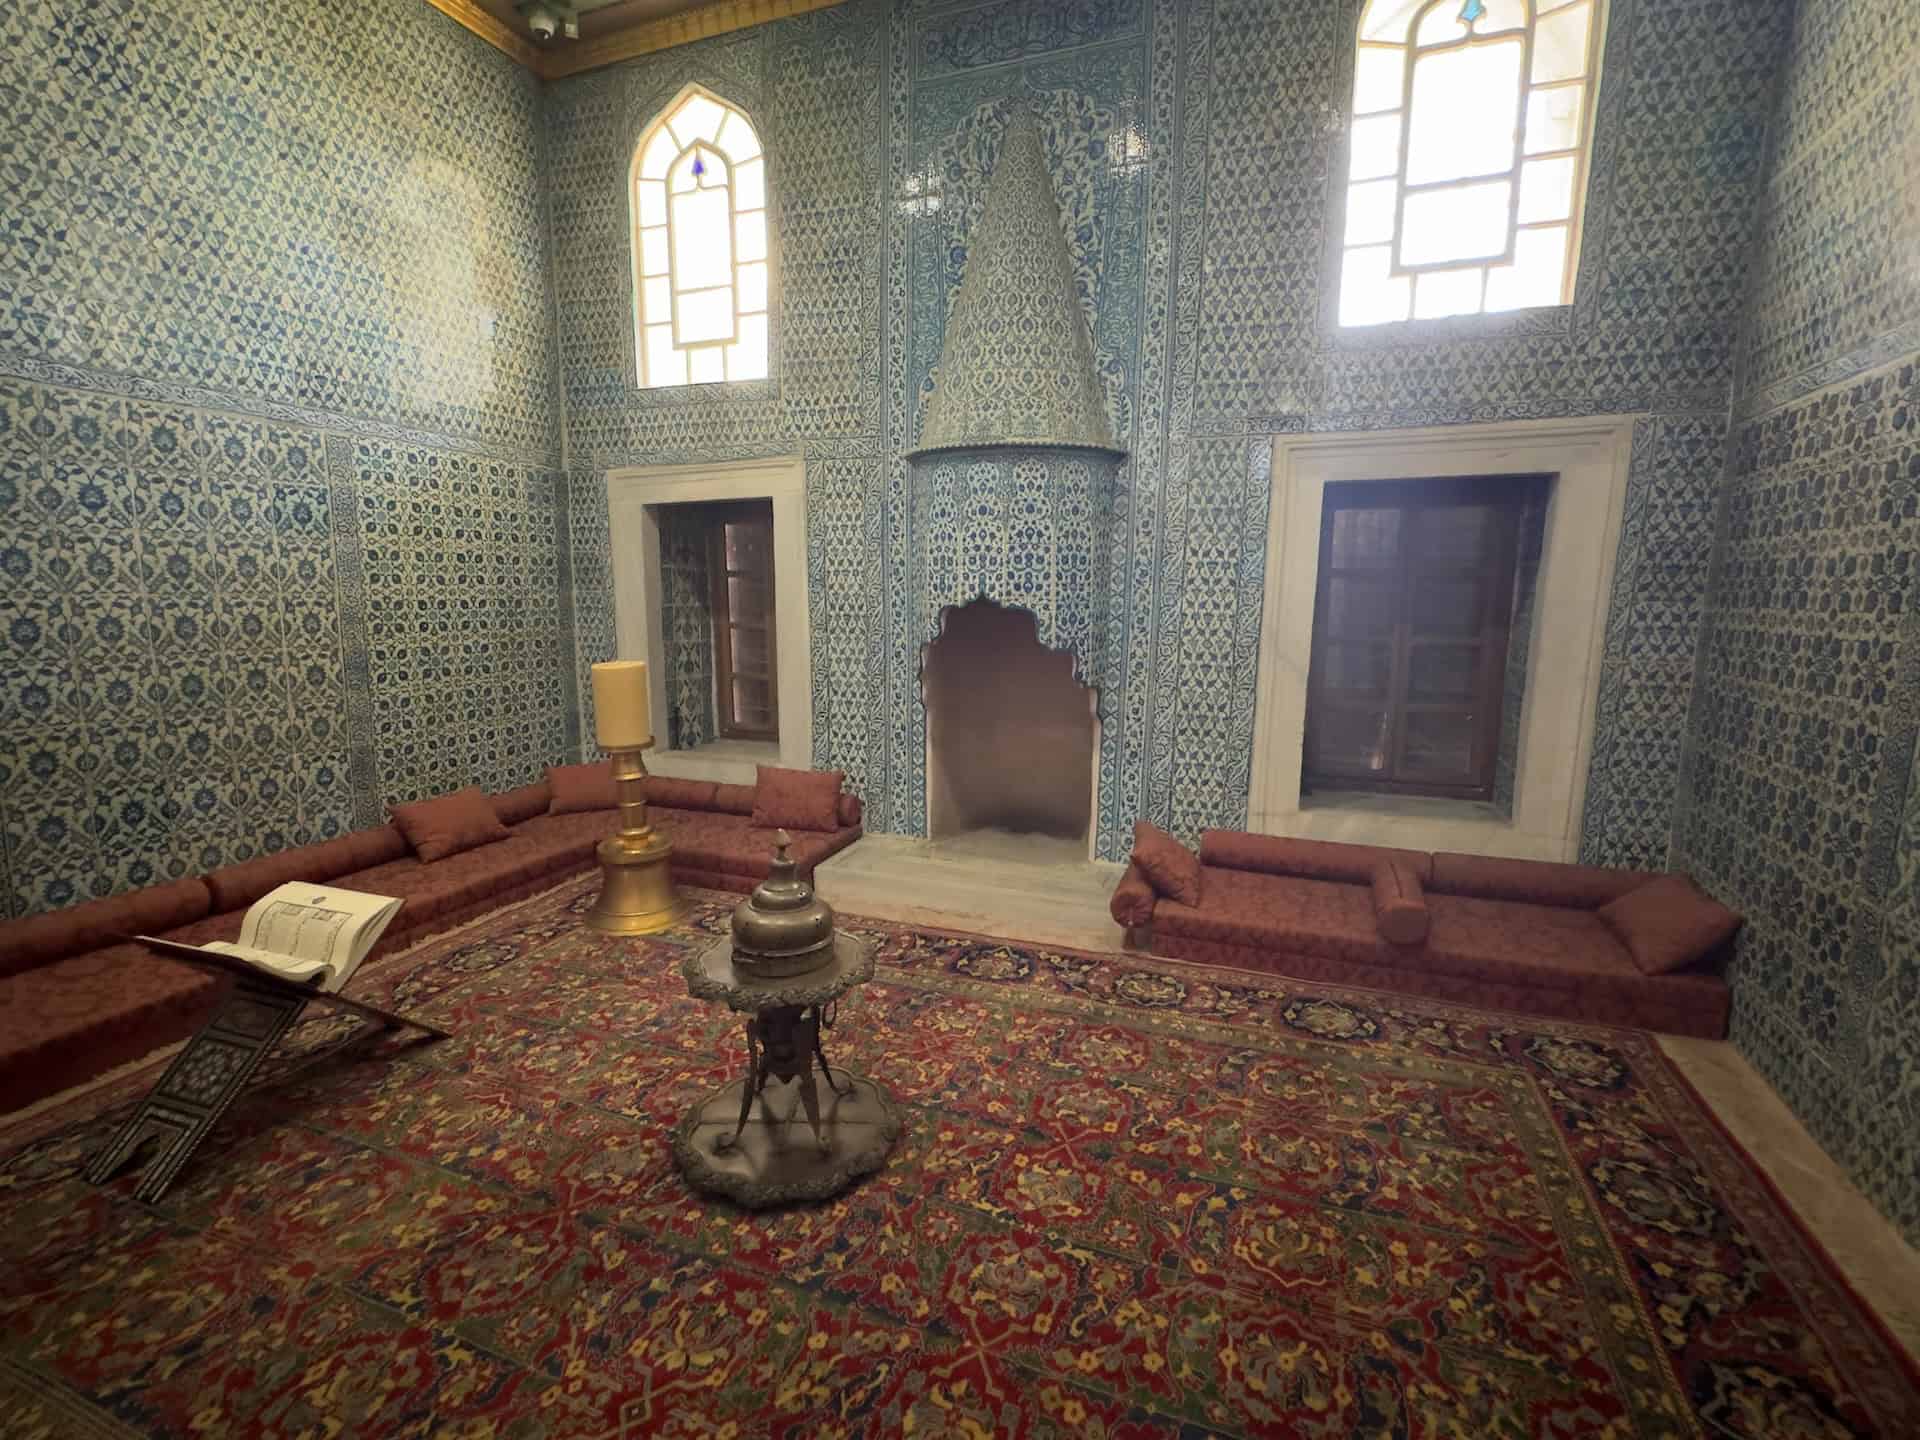 Chamber at the Sultan's Pavilion